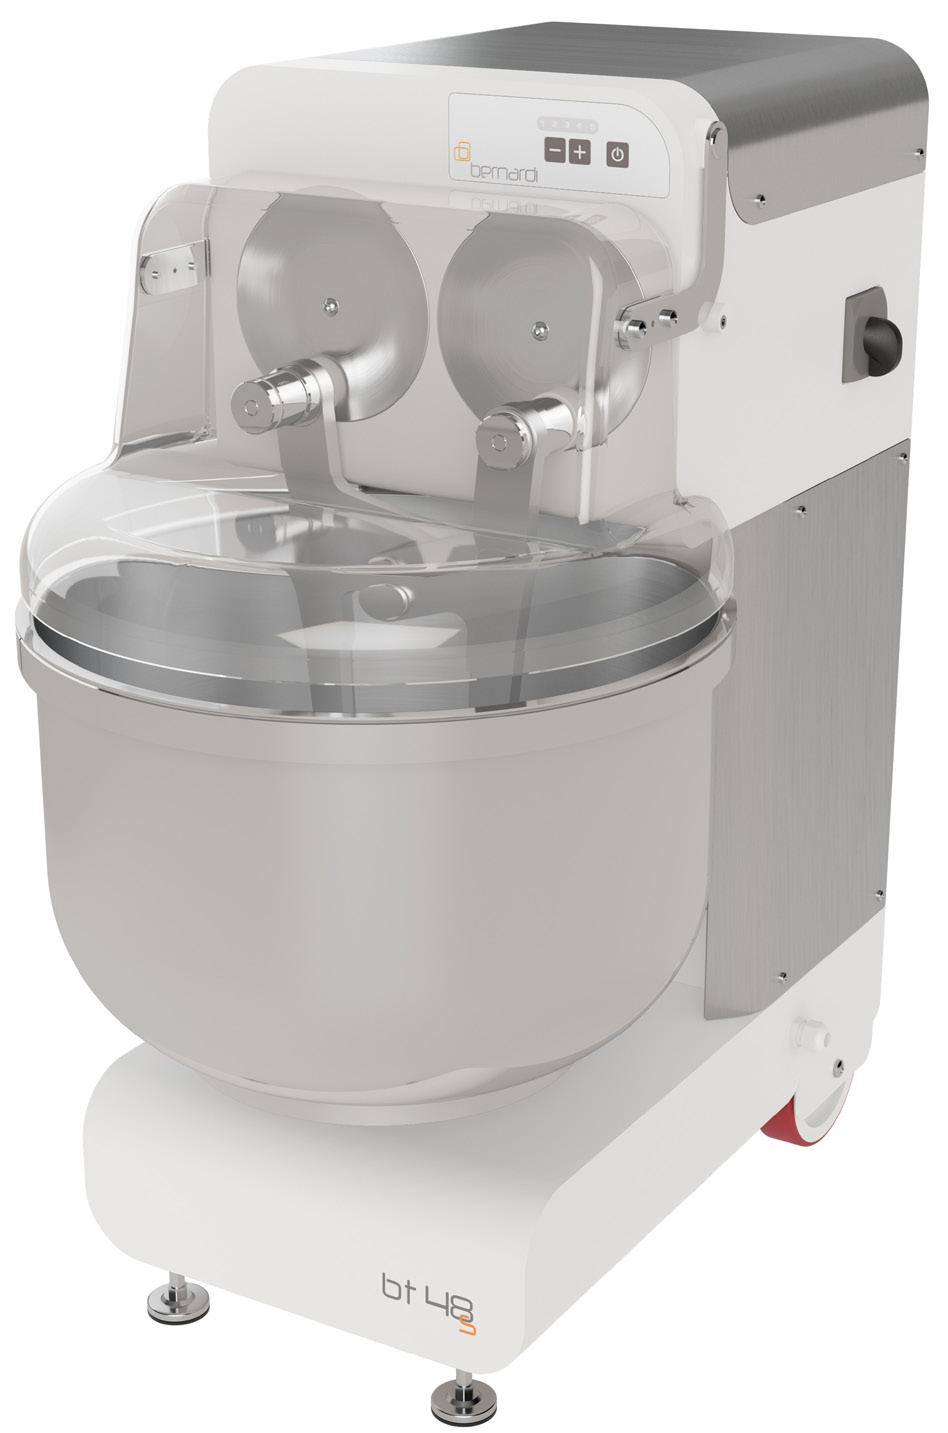 RANGE The BTs range represents the top of the double arm mixer range with the same kneading capacity and spacial dimensions of RS, but with an advanced fivespeed inverter-controlled arm moving system